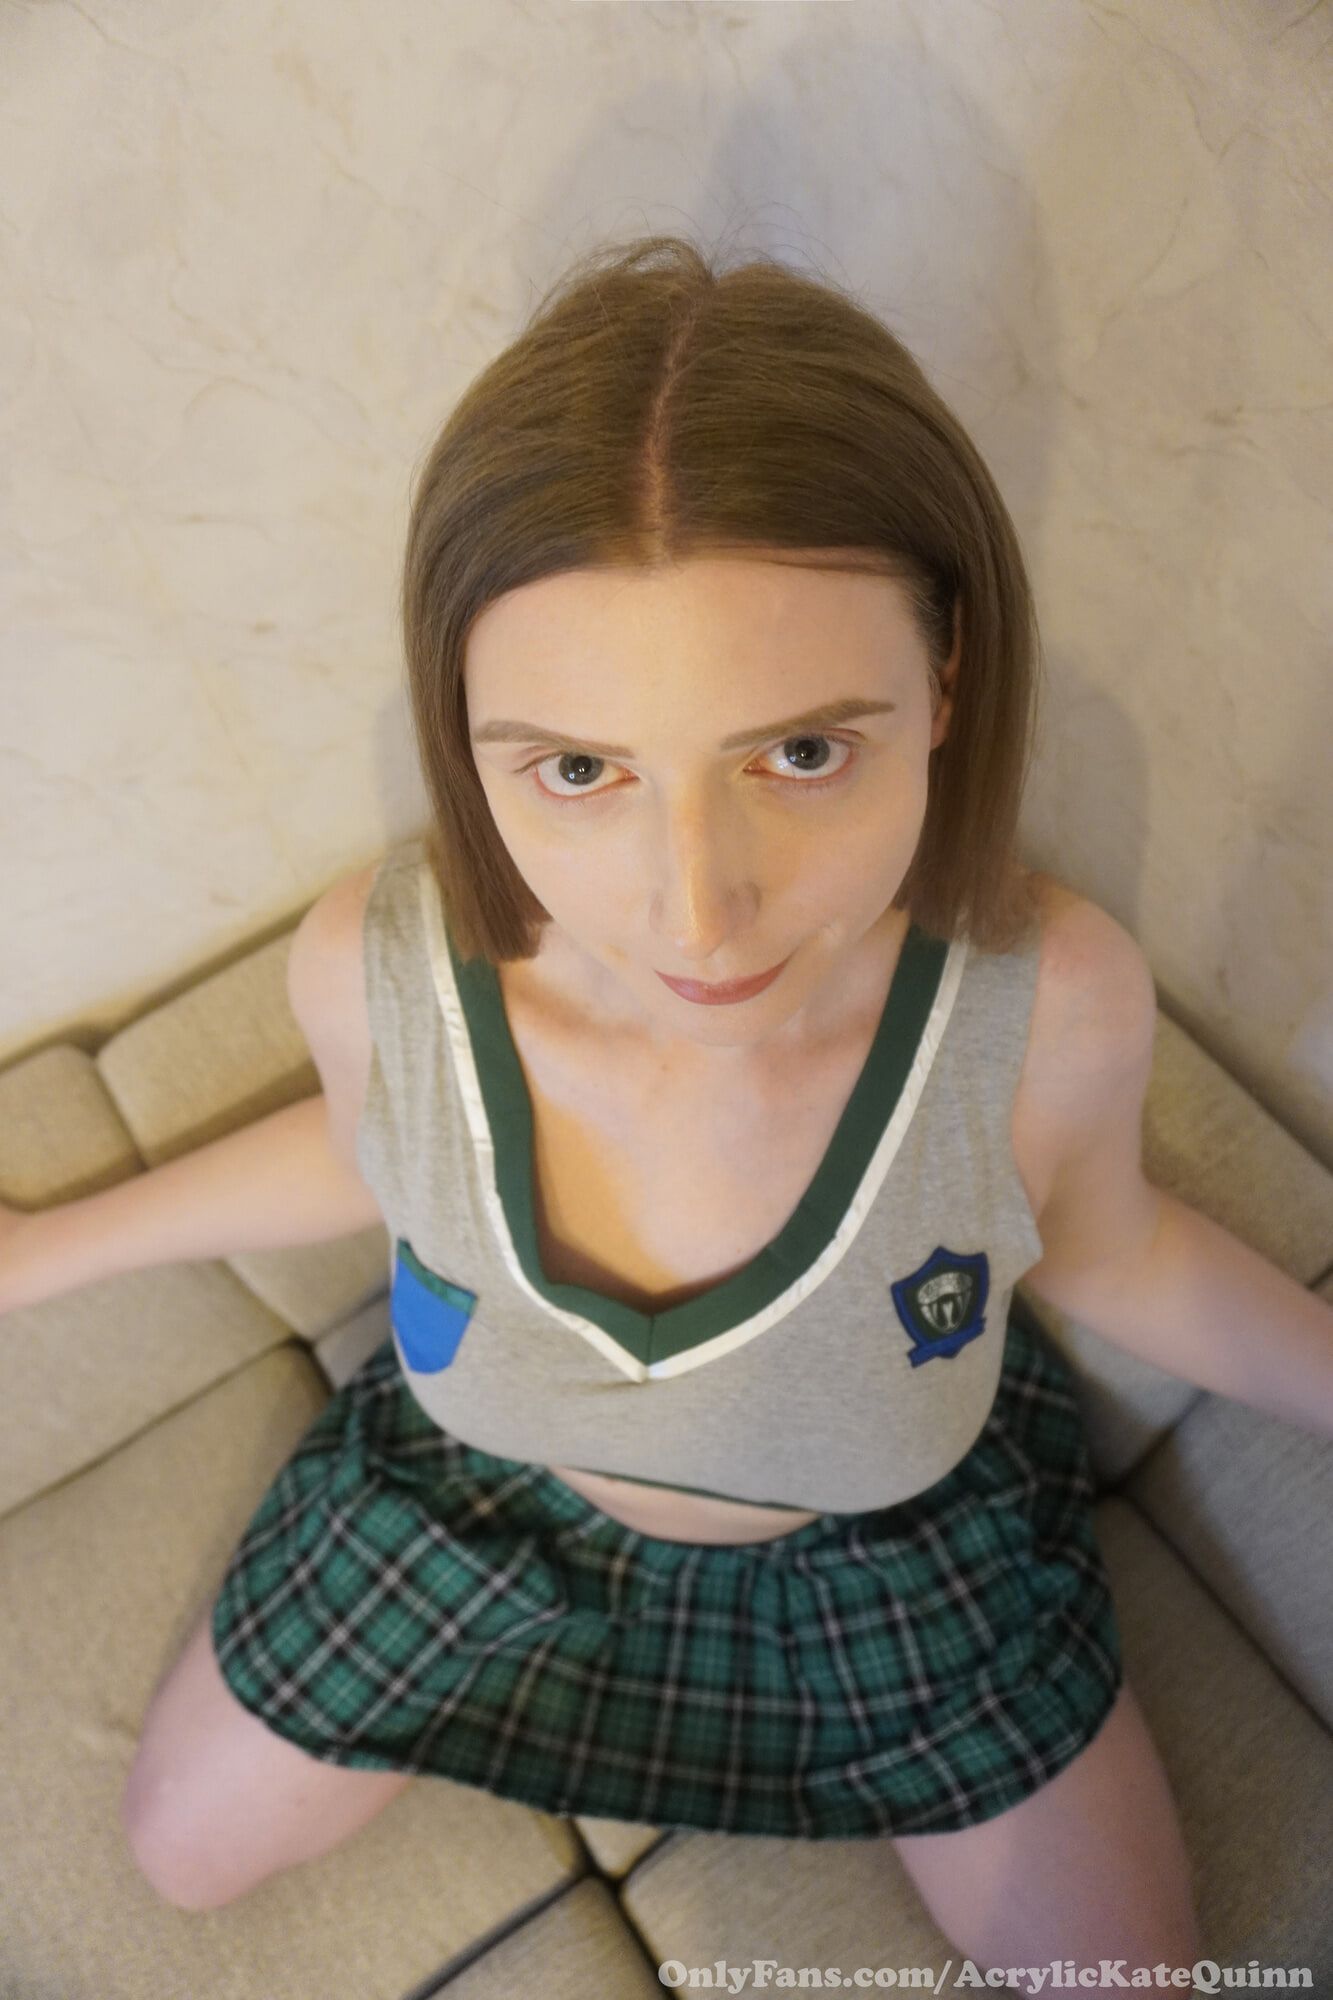 POV: Your Slytherin gf is giving you that look again 